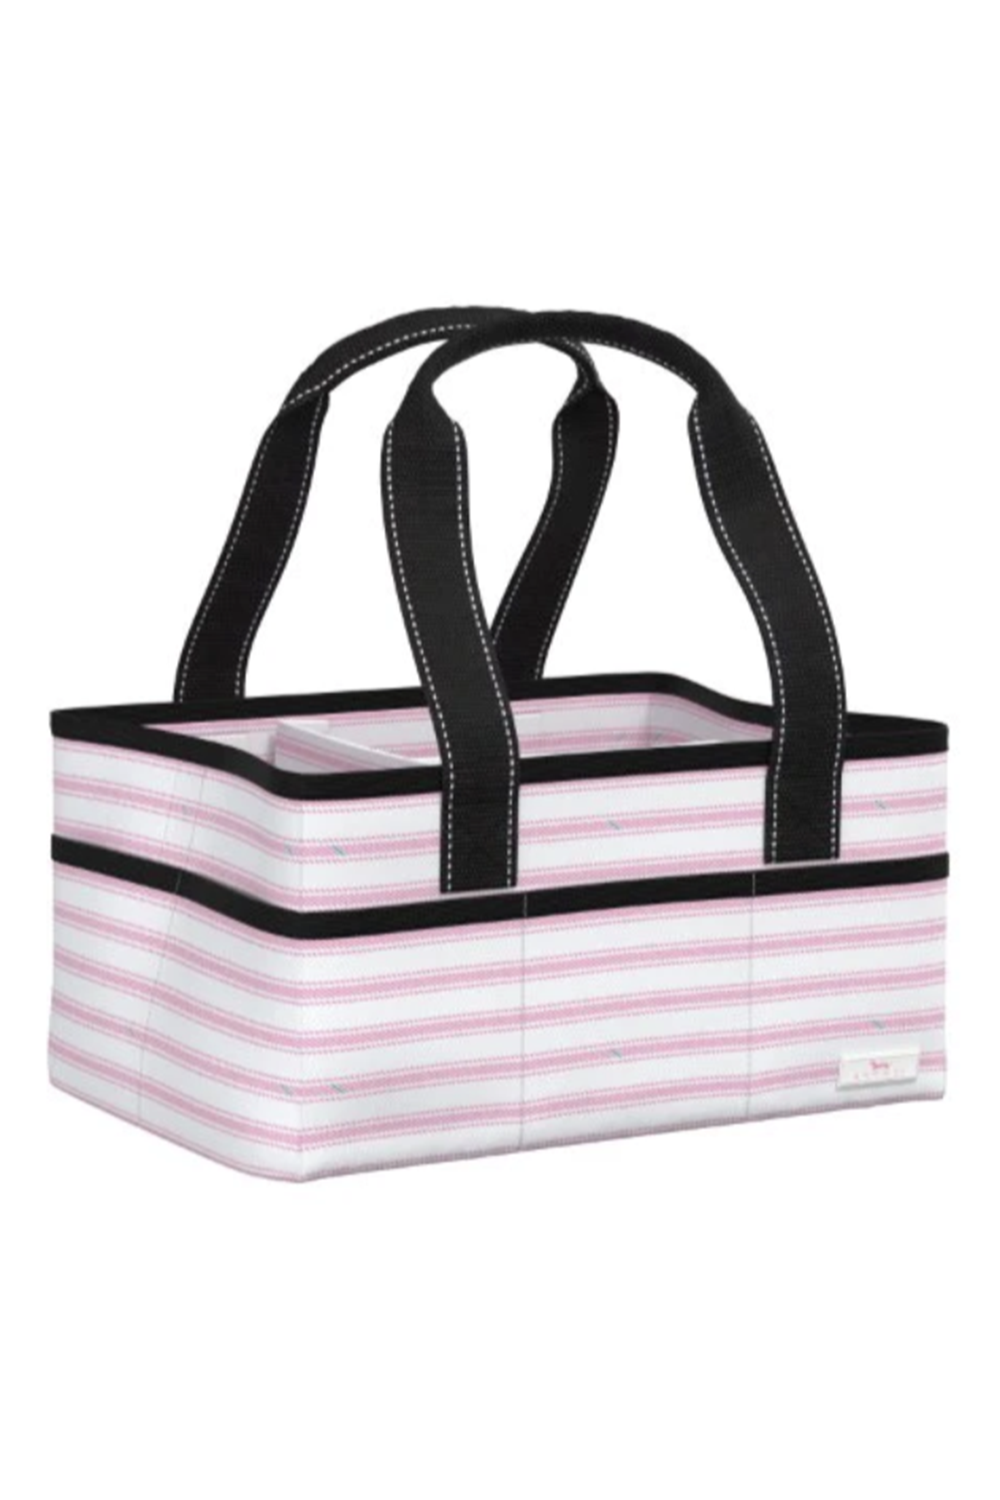 Hiney Helper Diaper Caddy - "Tickled Pink" BBY23